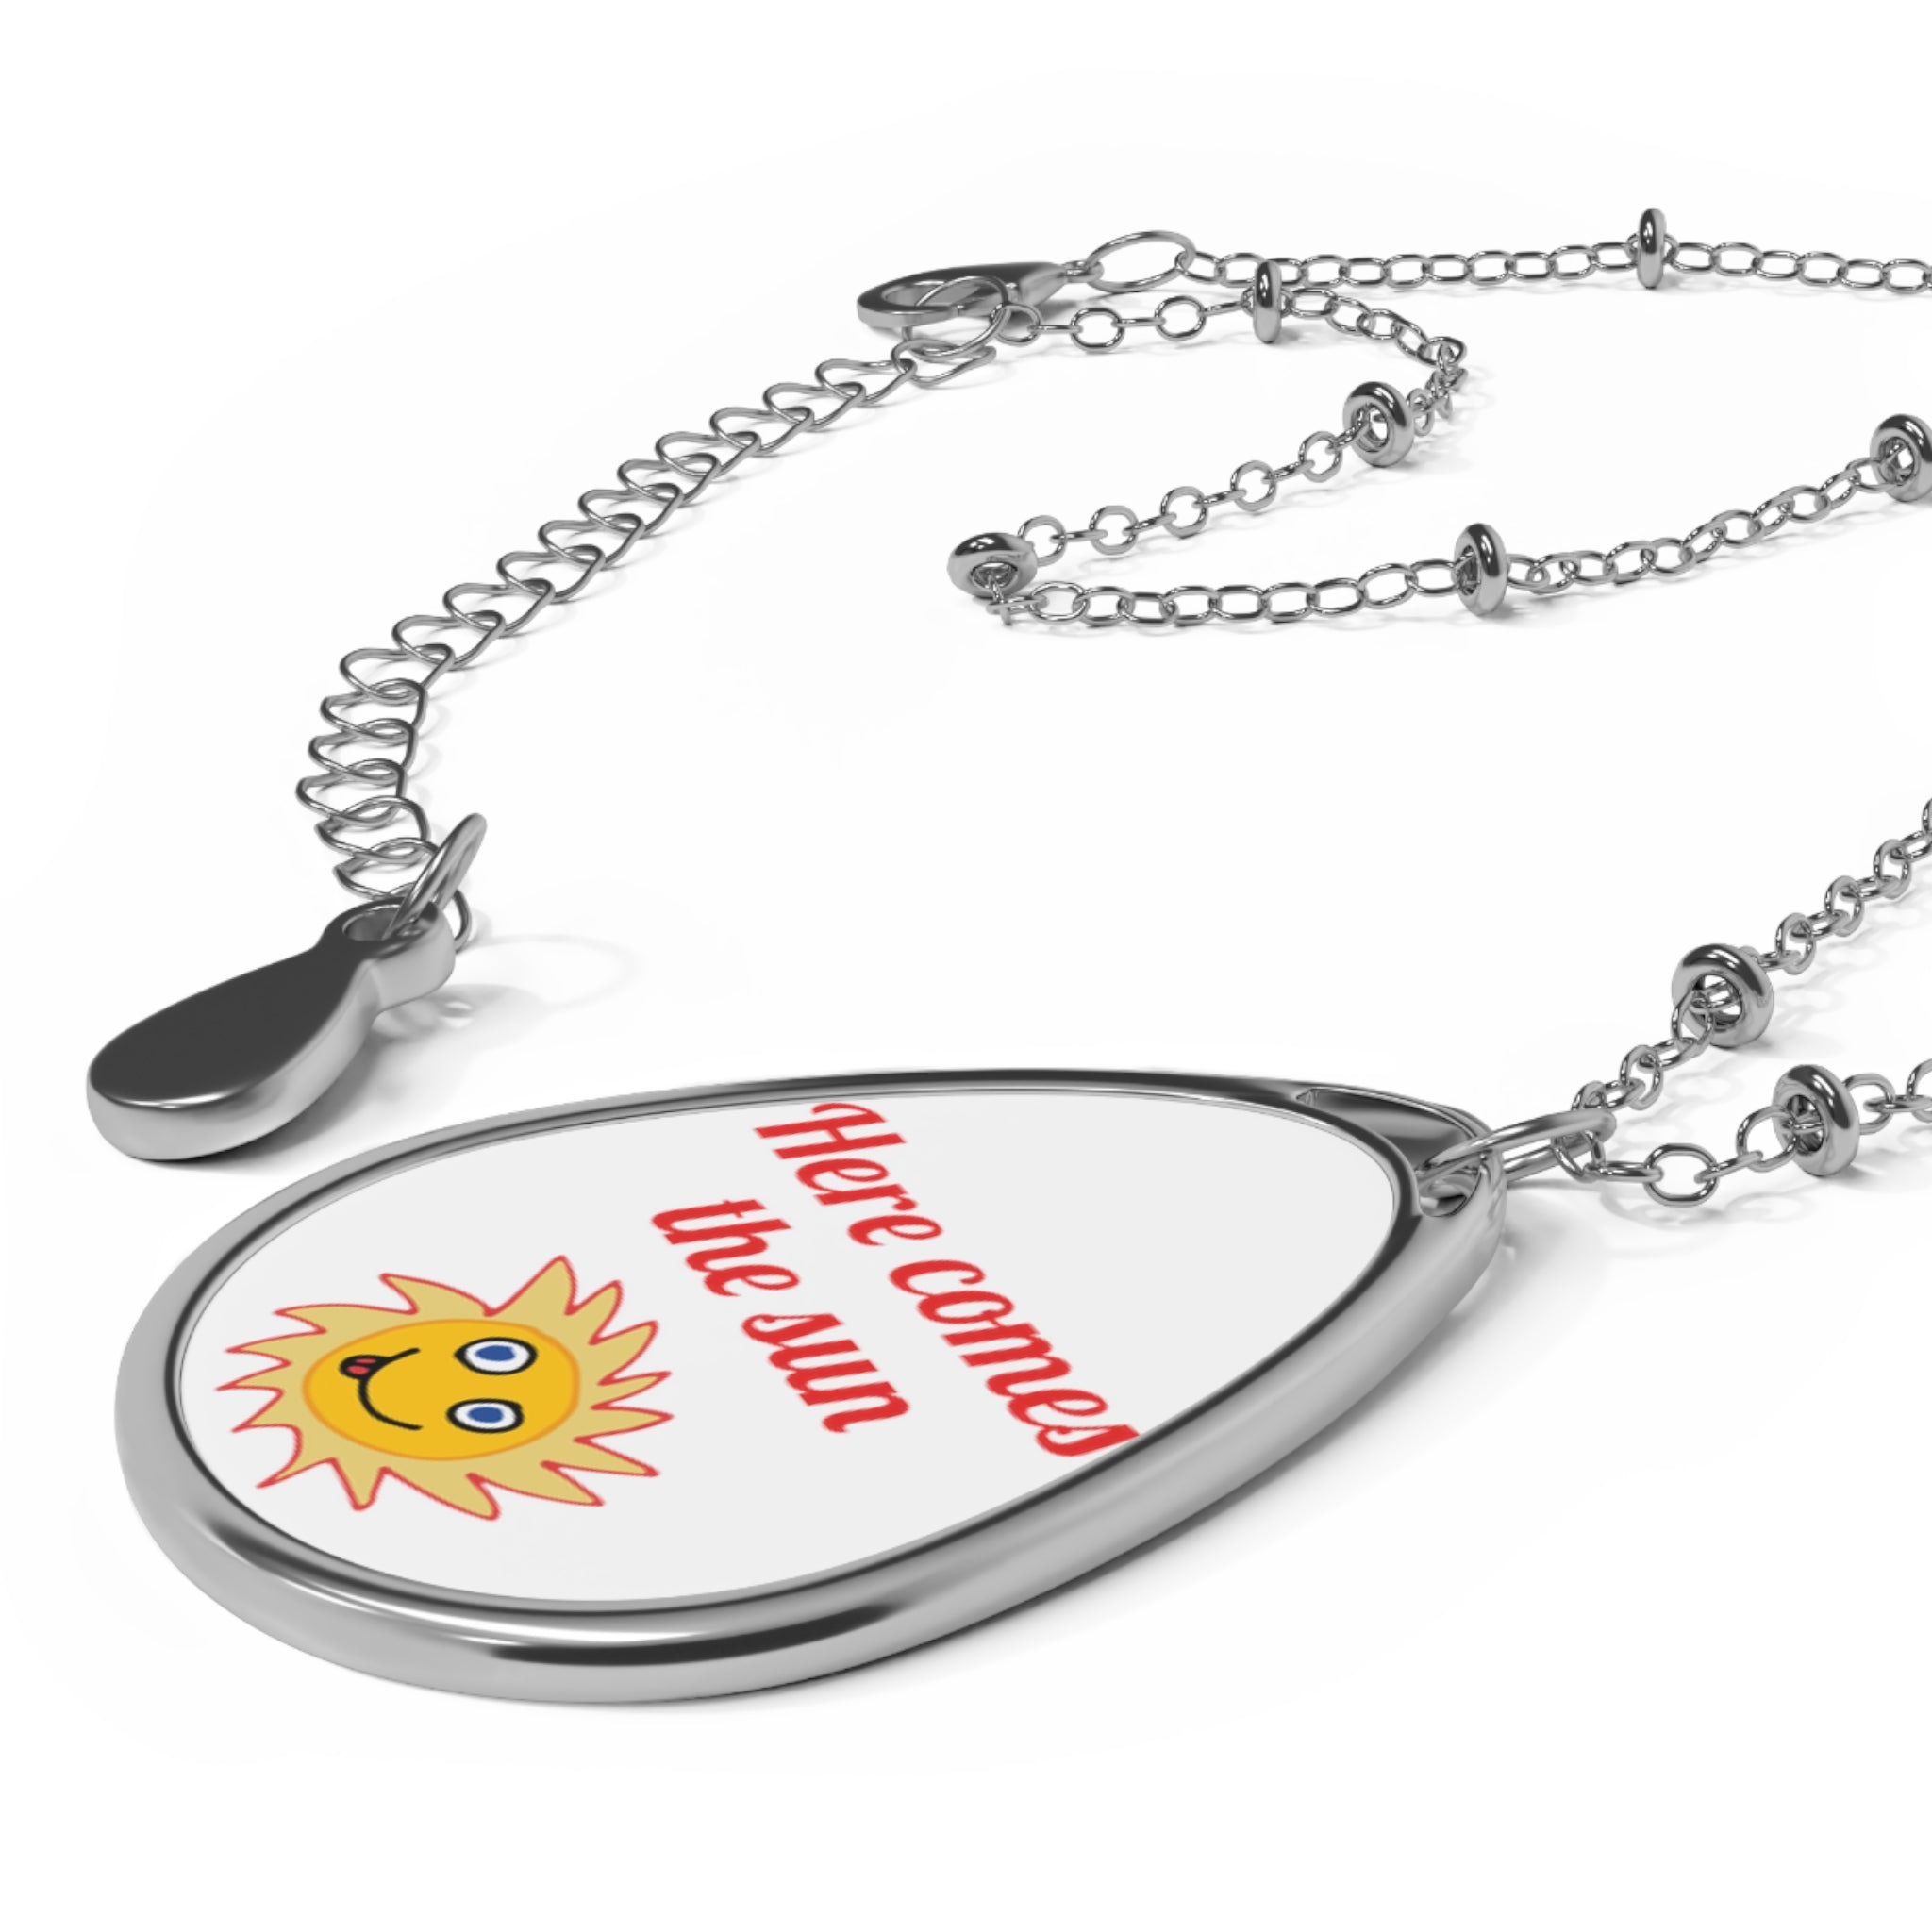 Here Comes the Sun Oval Necklace